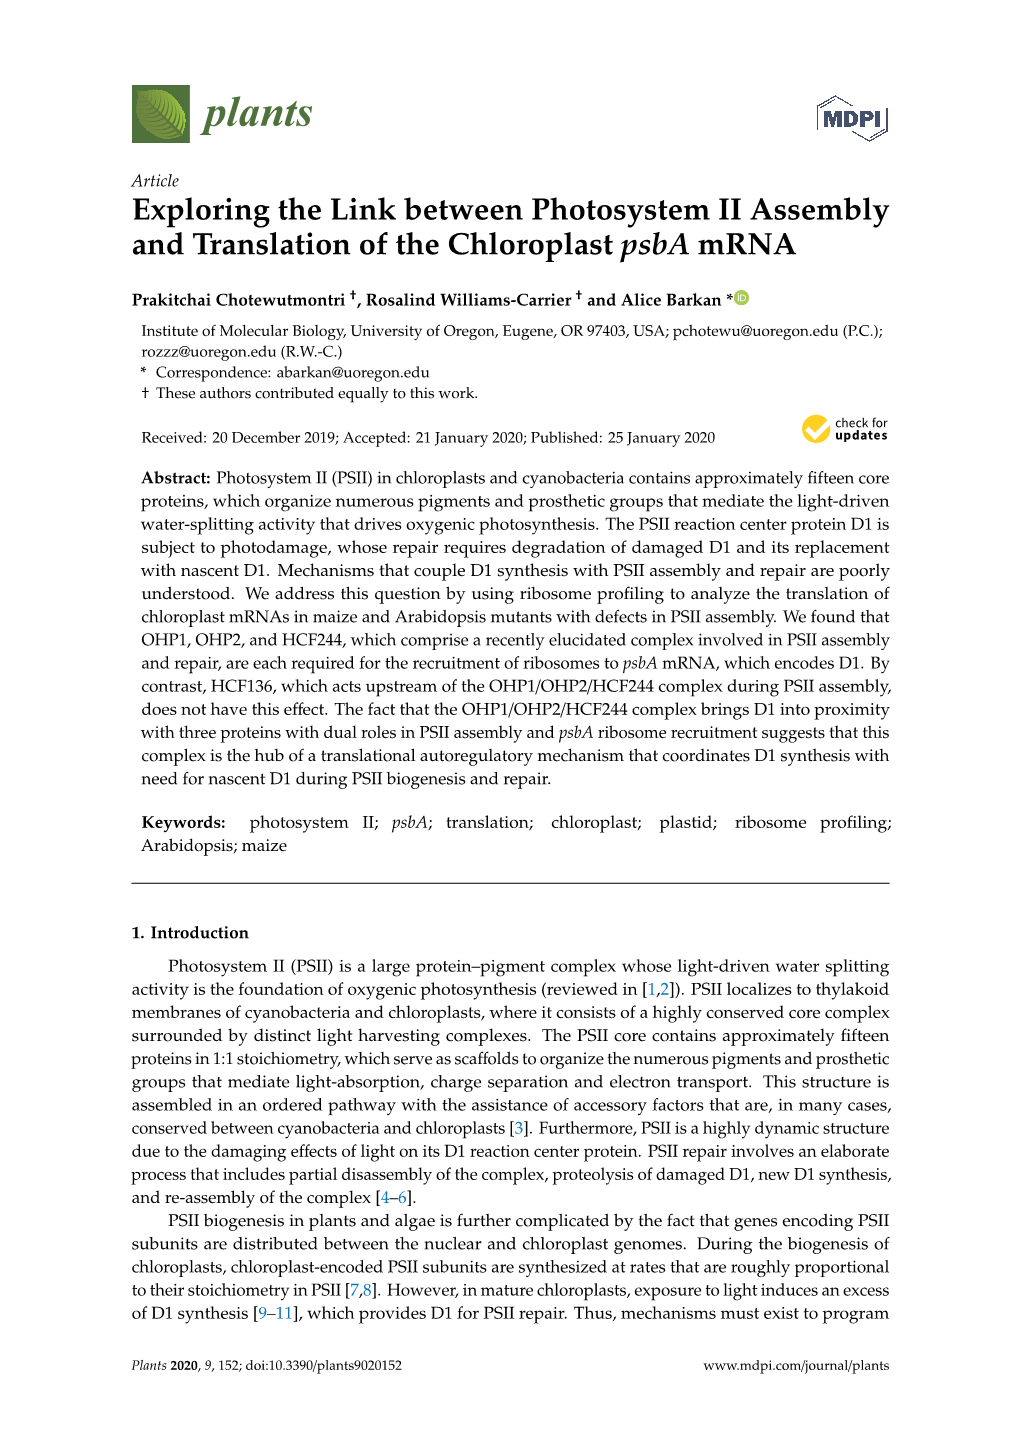 Exploring the Link Between Photosystem II Assembly and Translation of the Chloroplast Psba Mrna